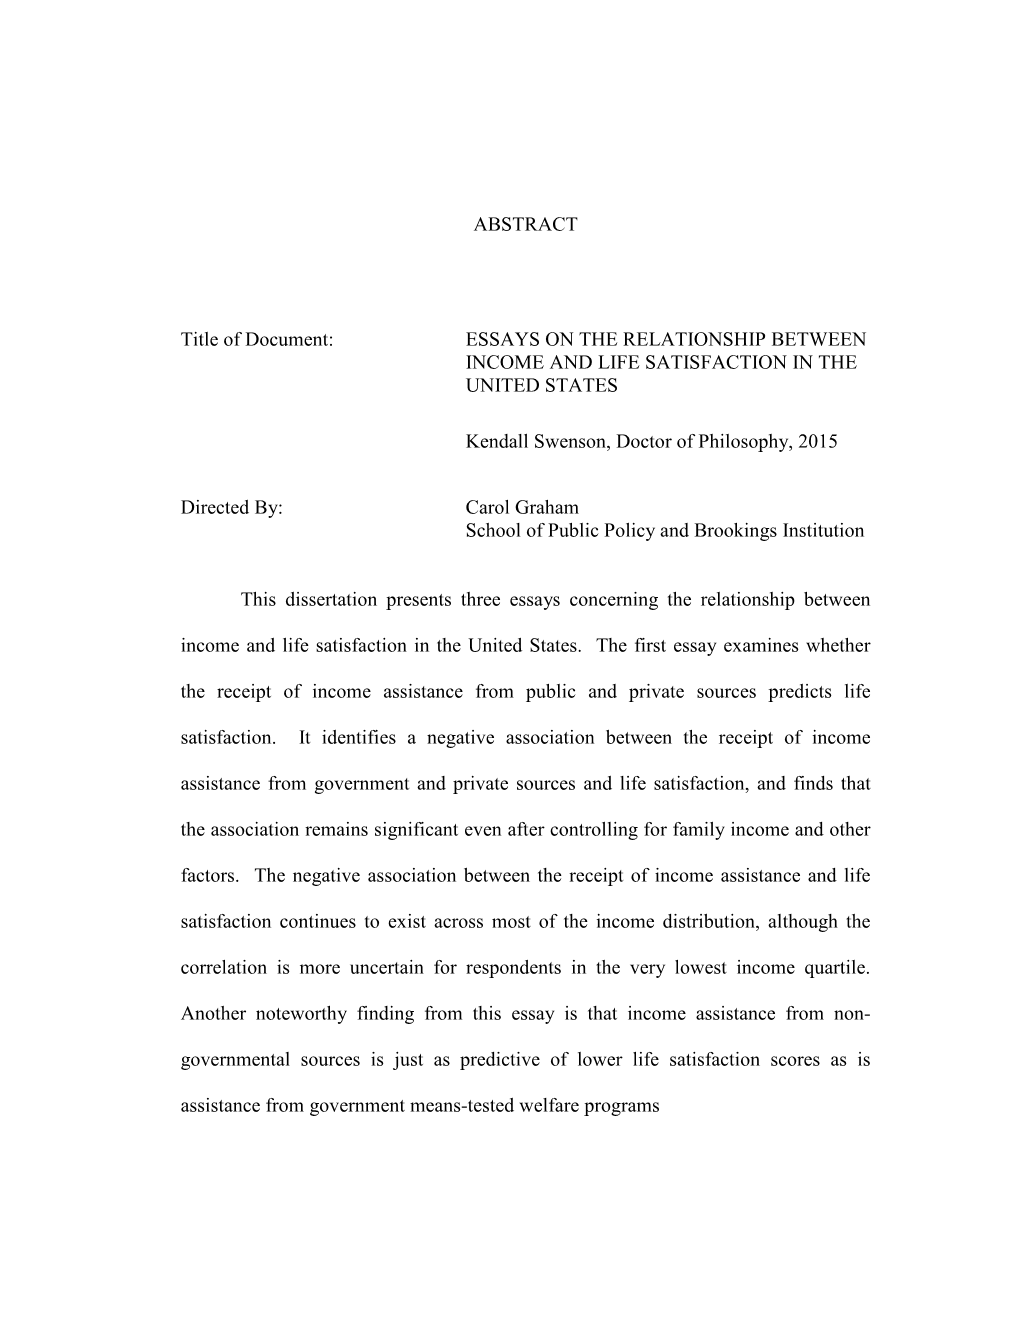 ABSTRACT Title of Document: ESSAYS on the RELATIONSHIP BETWEEN INCOME and LIFE SATISFACTION in the UNITED STATES Kendall Swenson